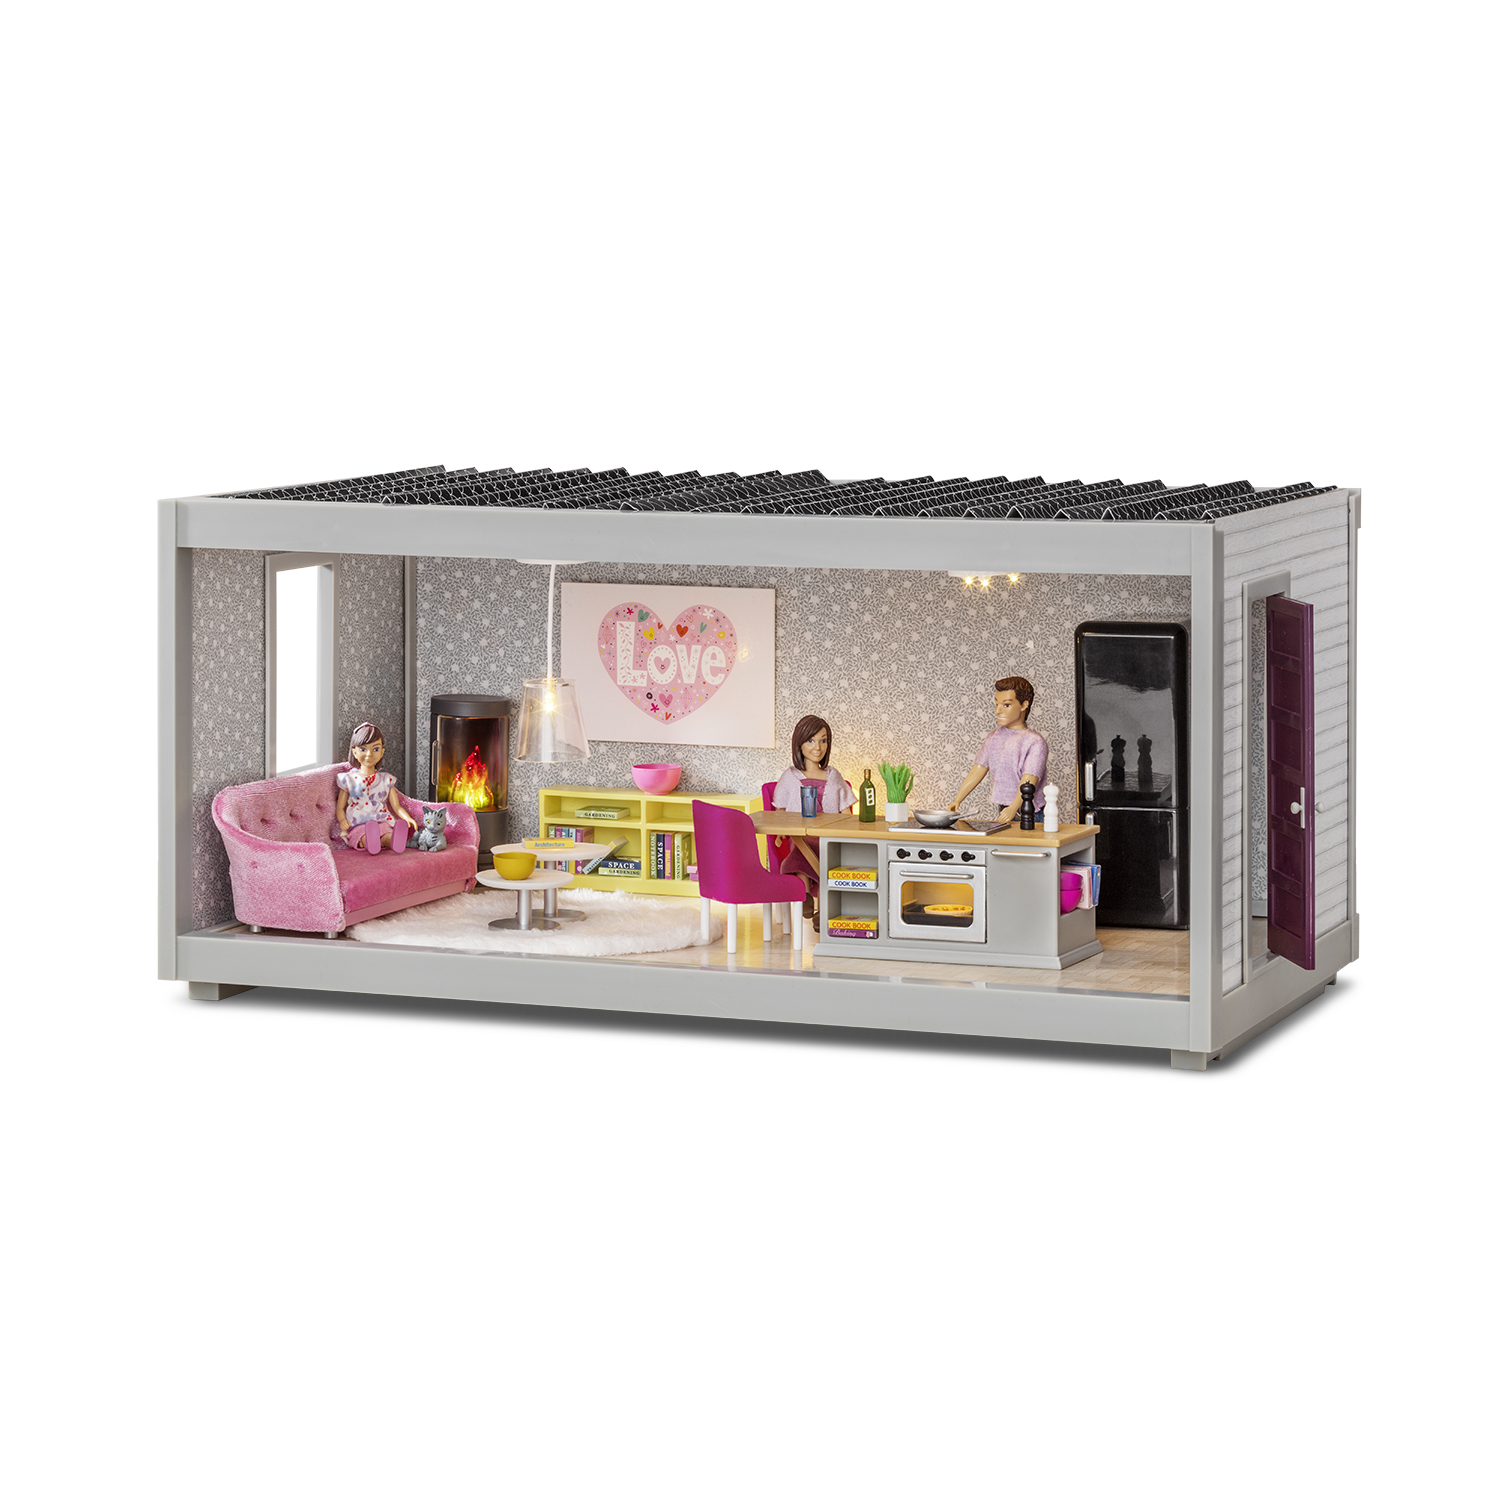 Lundby Official Site | Buy dollhouses and dolls from Lundby | Micki